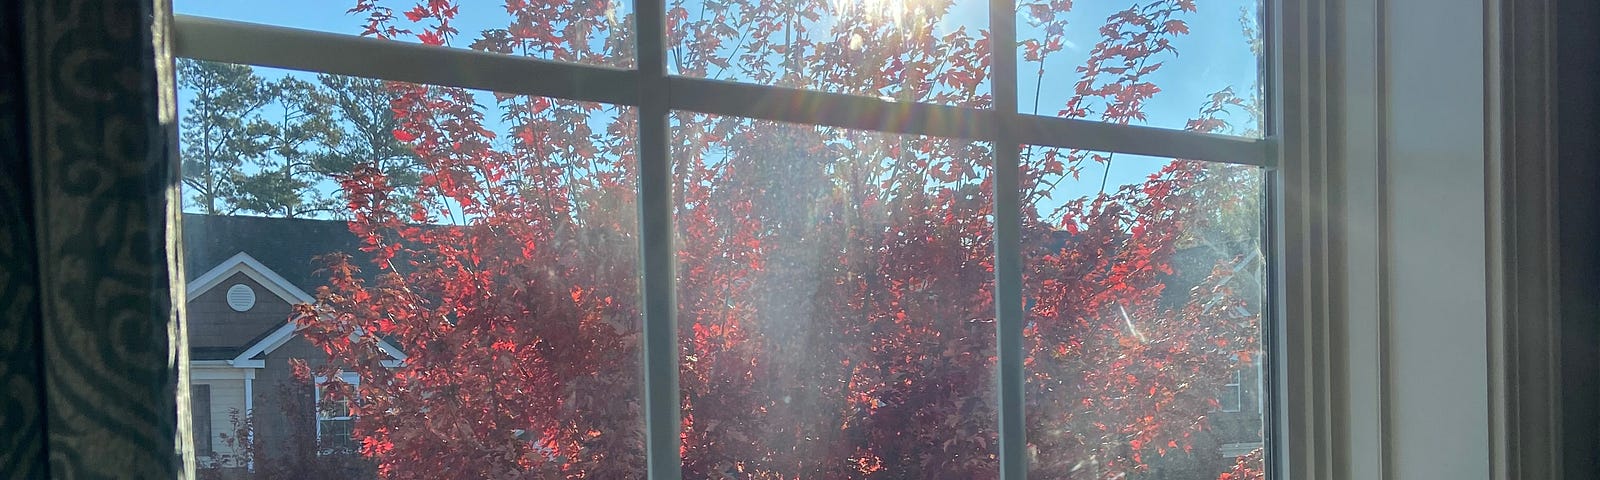 Sun shining bright over a red autum tree captured via a window